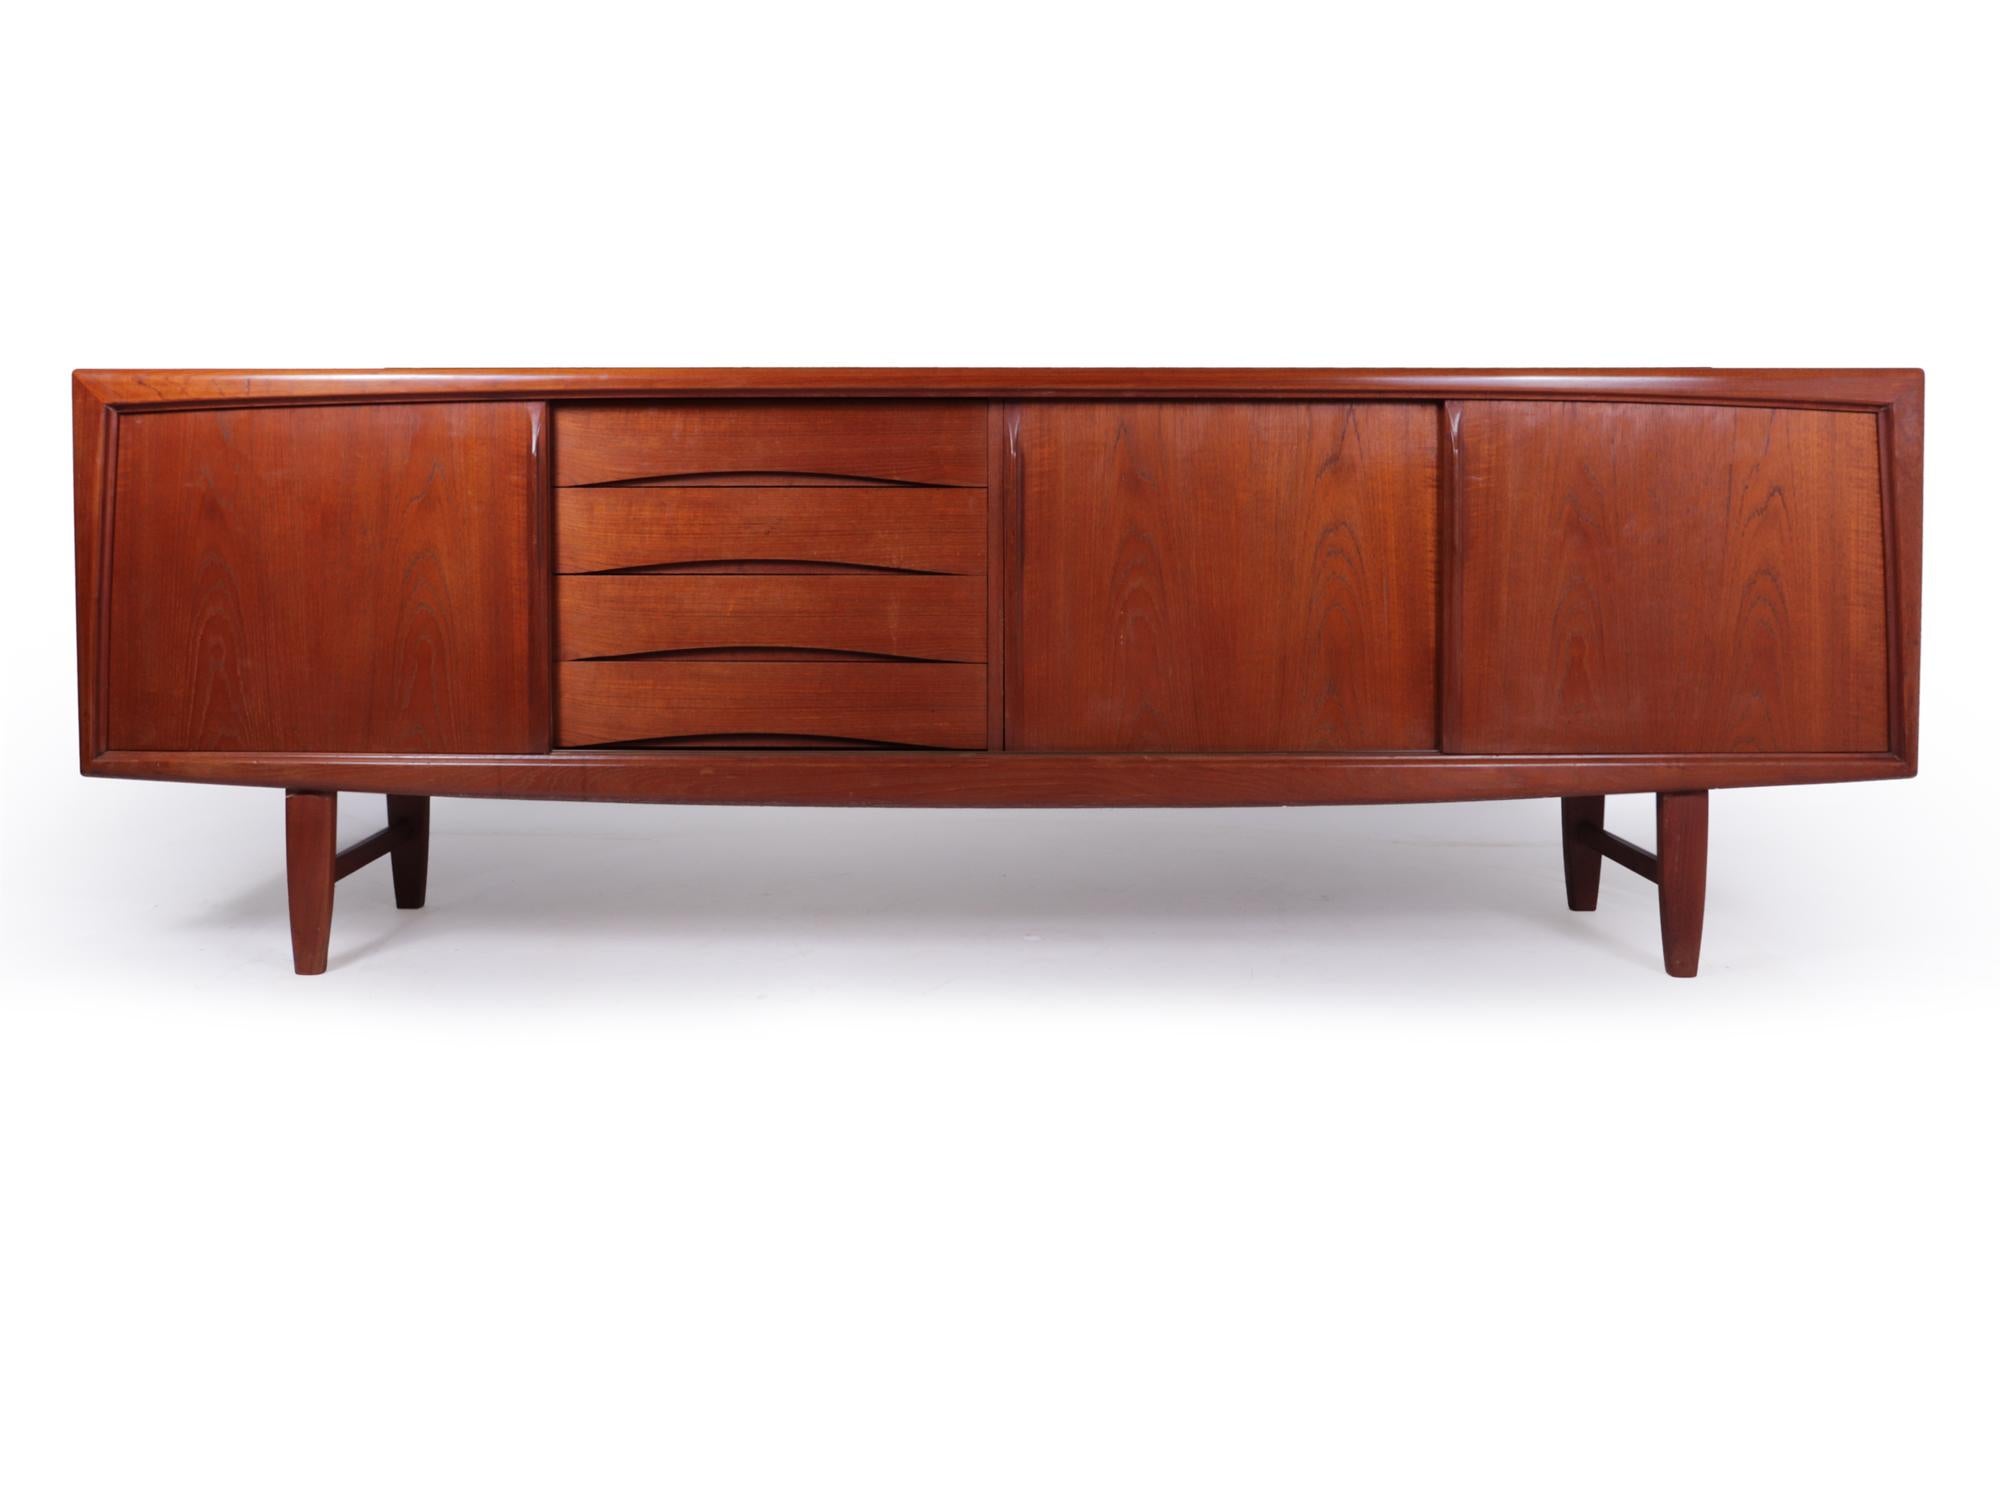 Danish mid century teak sideboard by H P Hansen
A large teak sideboard designed and produced by H P Hansen in Denmark in the 1960’s it has three sliding doors and four drawers with influences from there time working with Arne Vodder, the sideboard